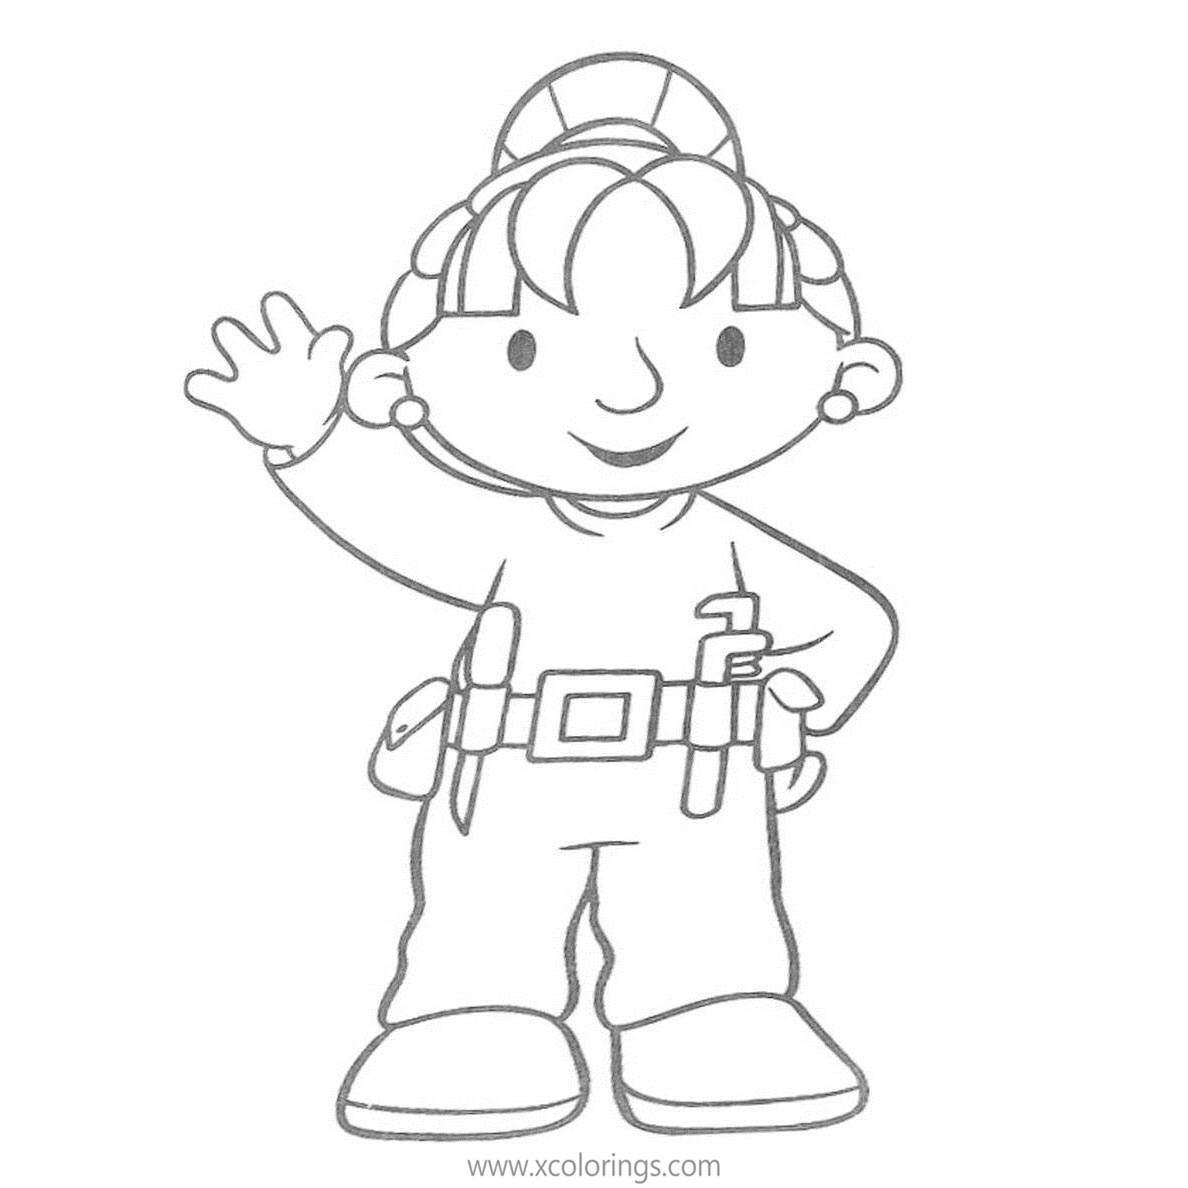 Free Bob the Builder Character Wendy Coloring Pages printable